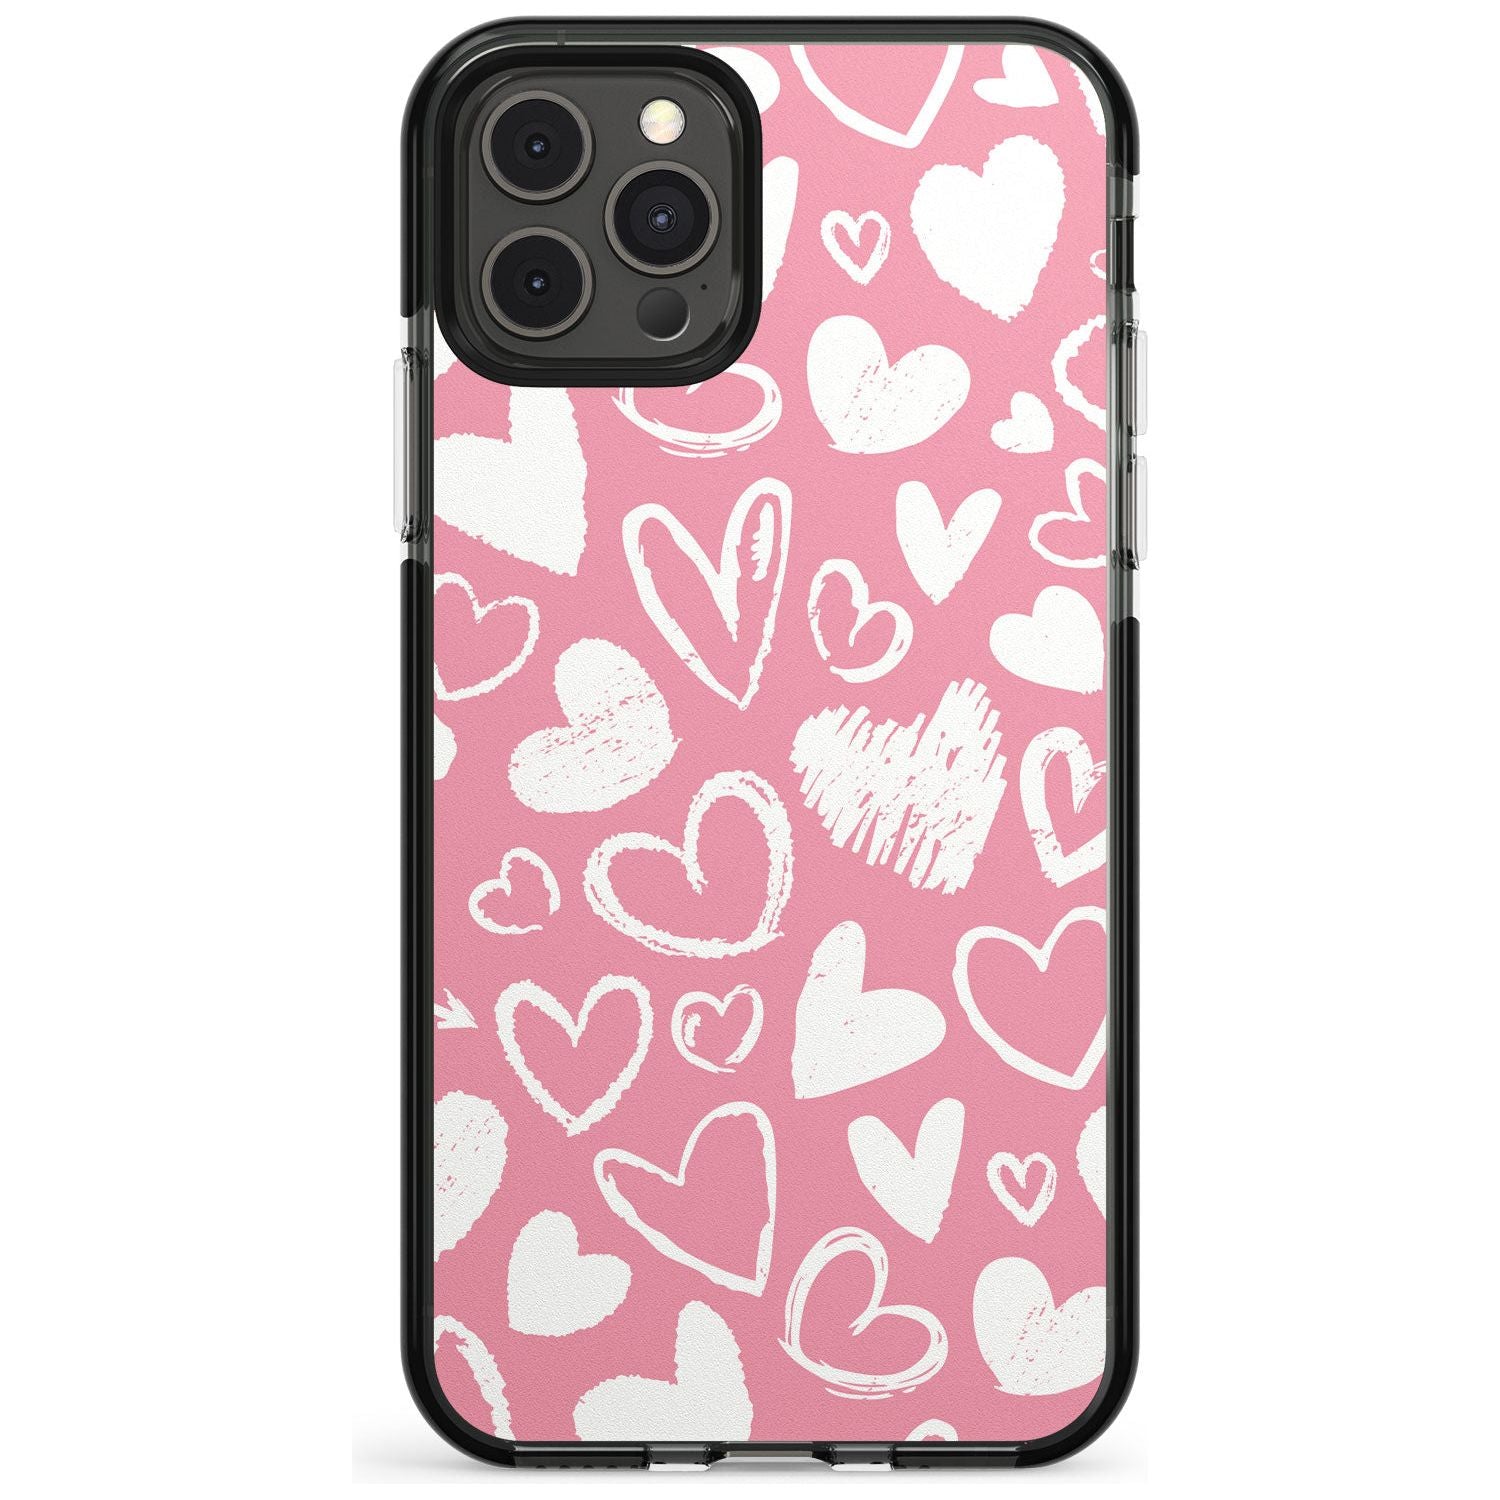 Chalk Hearts Black Impact Phone Case for iPhone 11